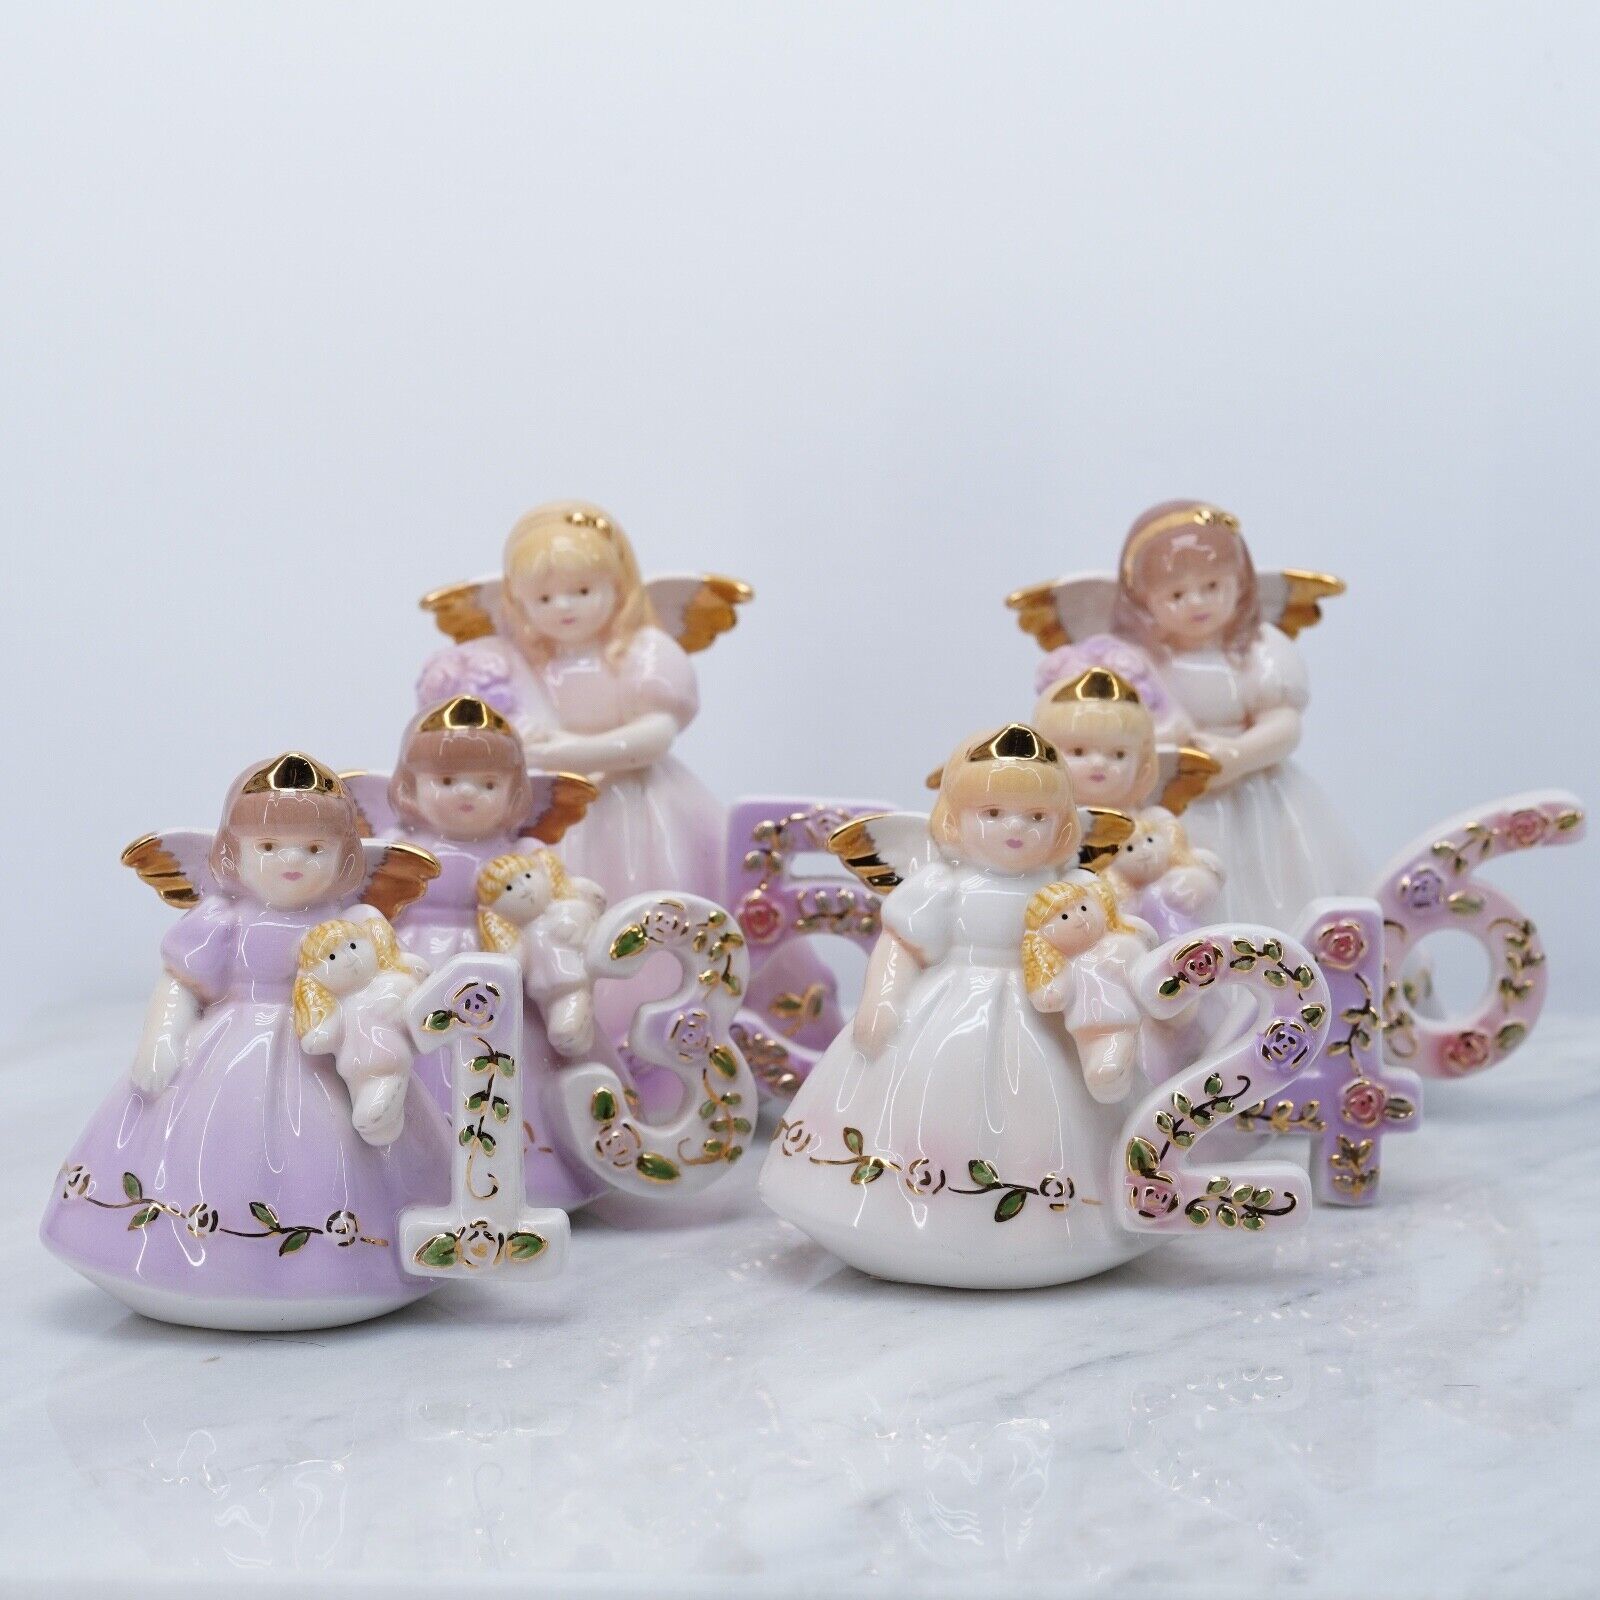 Primary image for Lot of 6 Josef Originals Birthday Girl Angel Figurines 1 2 3 4 5 6 Gold Wing